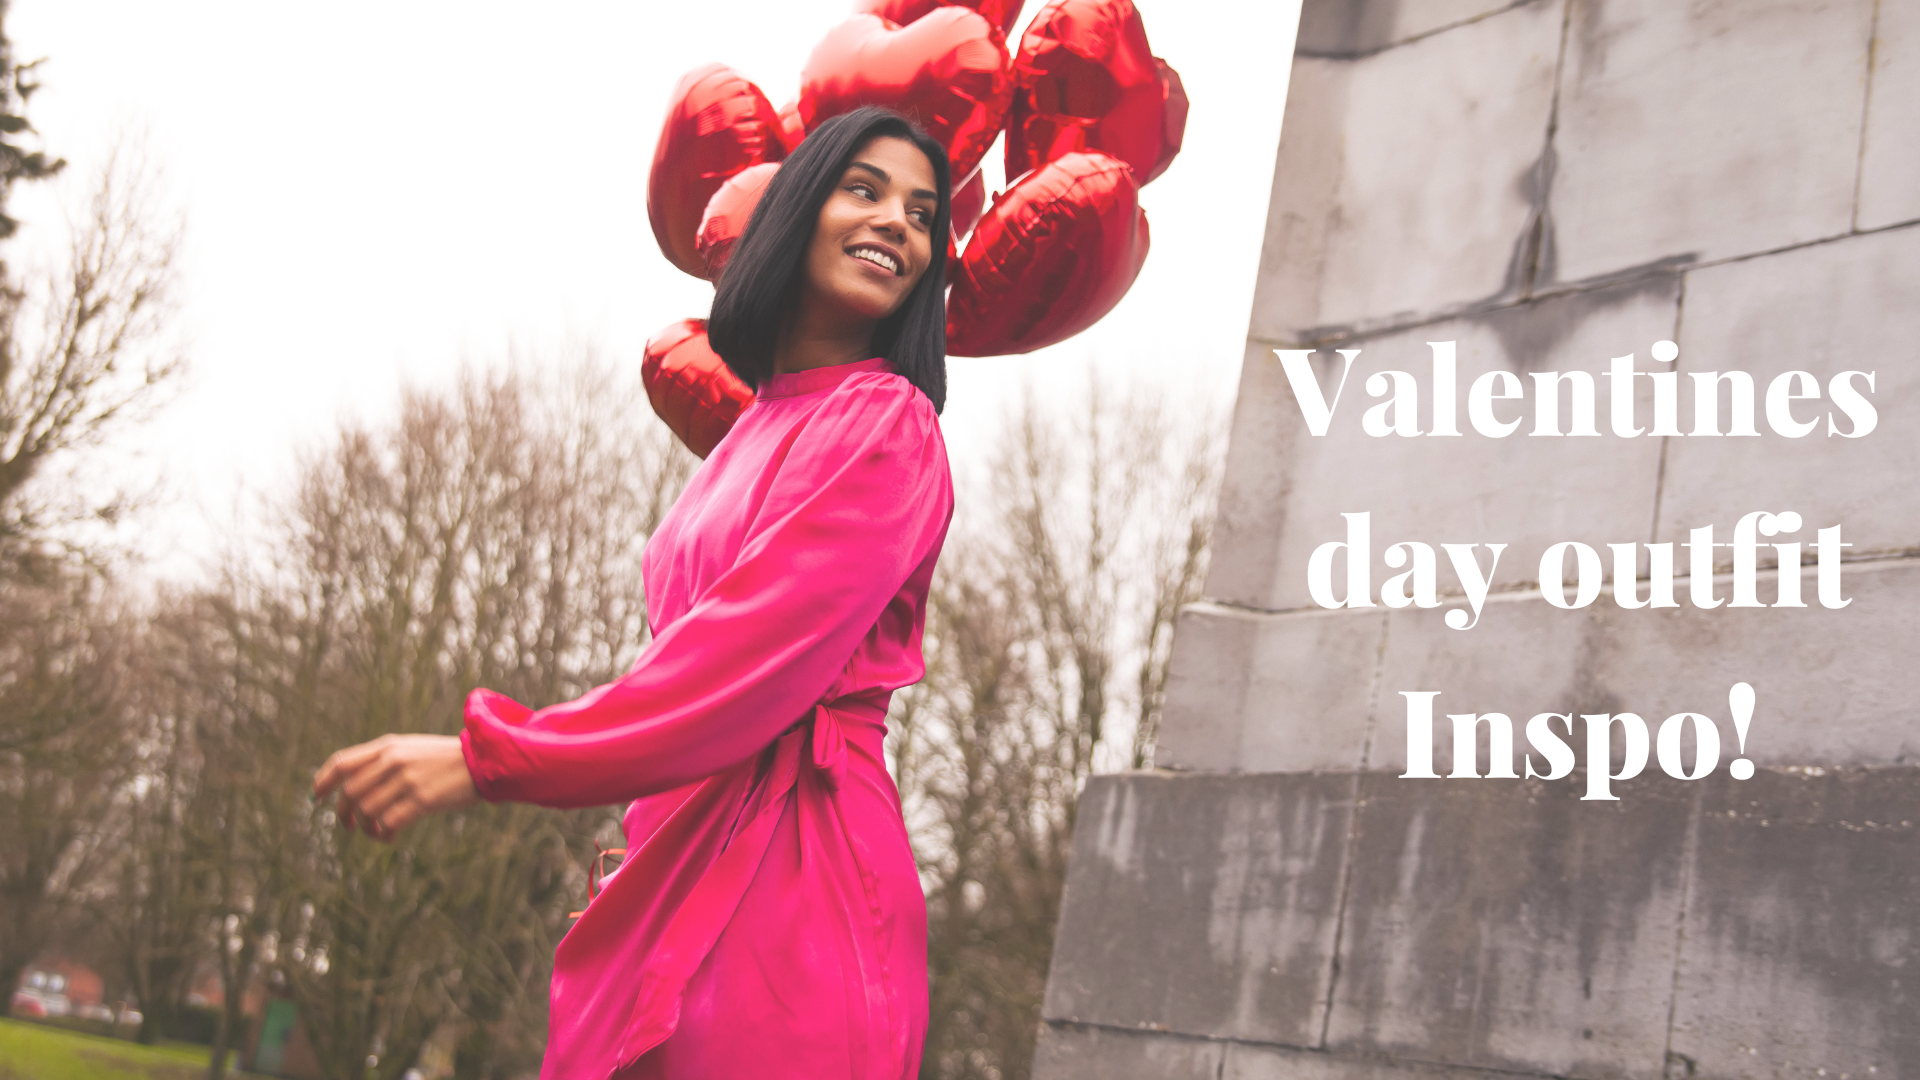 Virgo Boutique | Valentines Day Outfit Inspo!